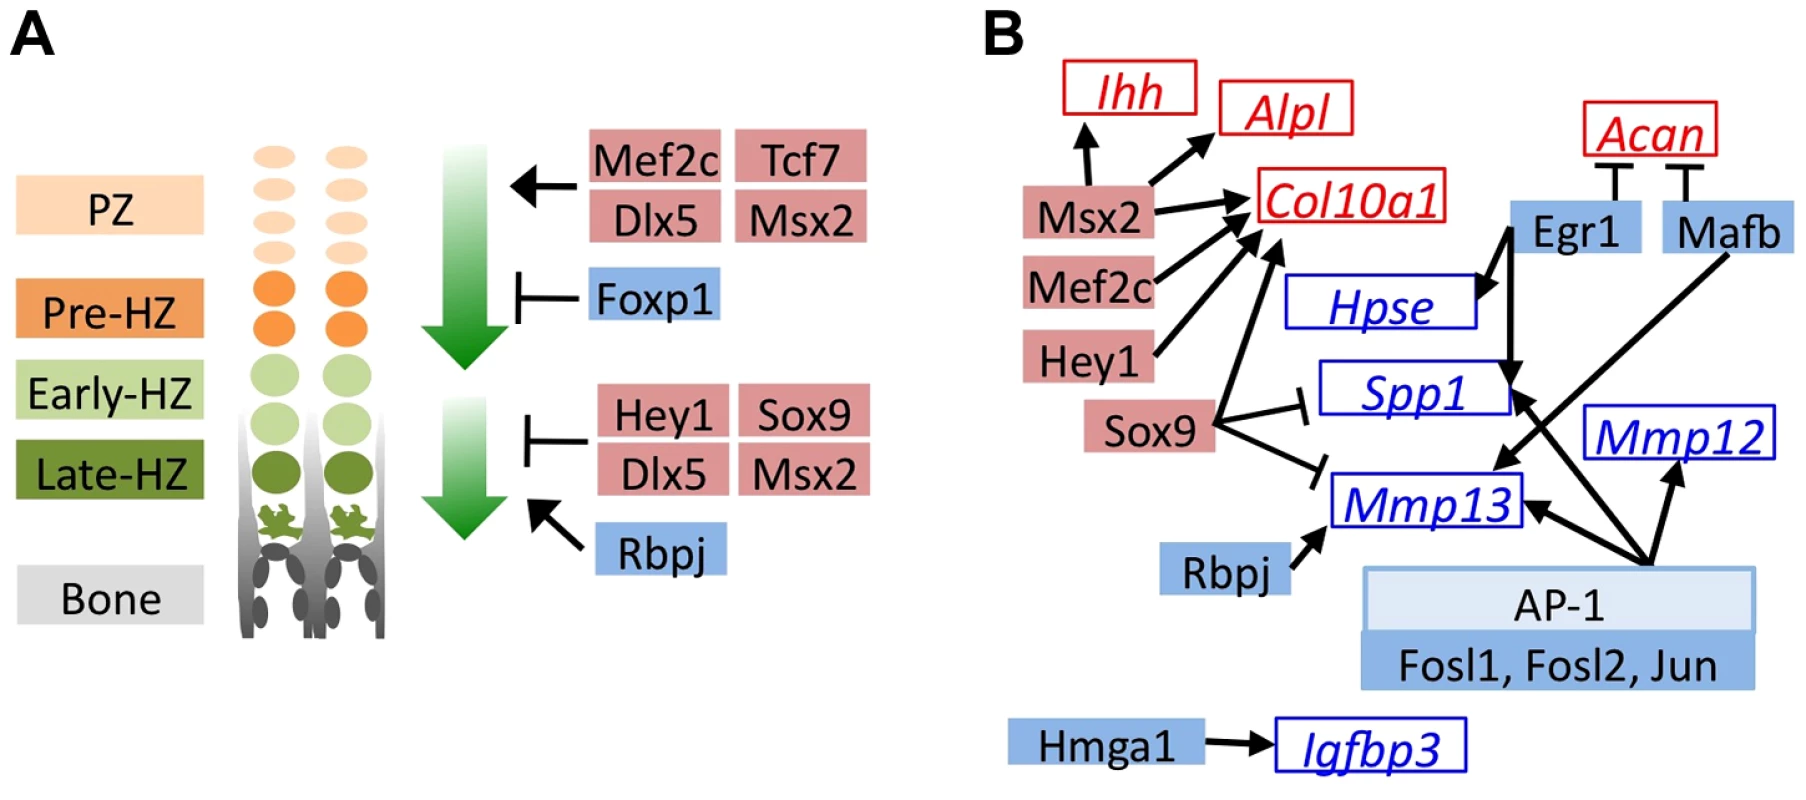 MEK1/2 inhibition or SHP2 depletion alters the expression of transcription factors with known roles in chondrocyte maturation.